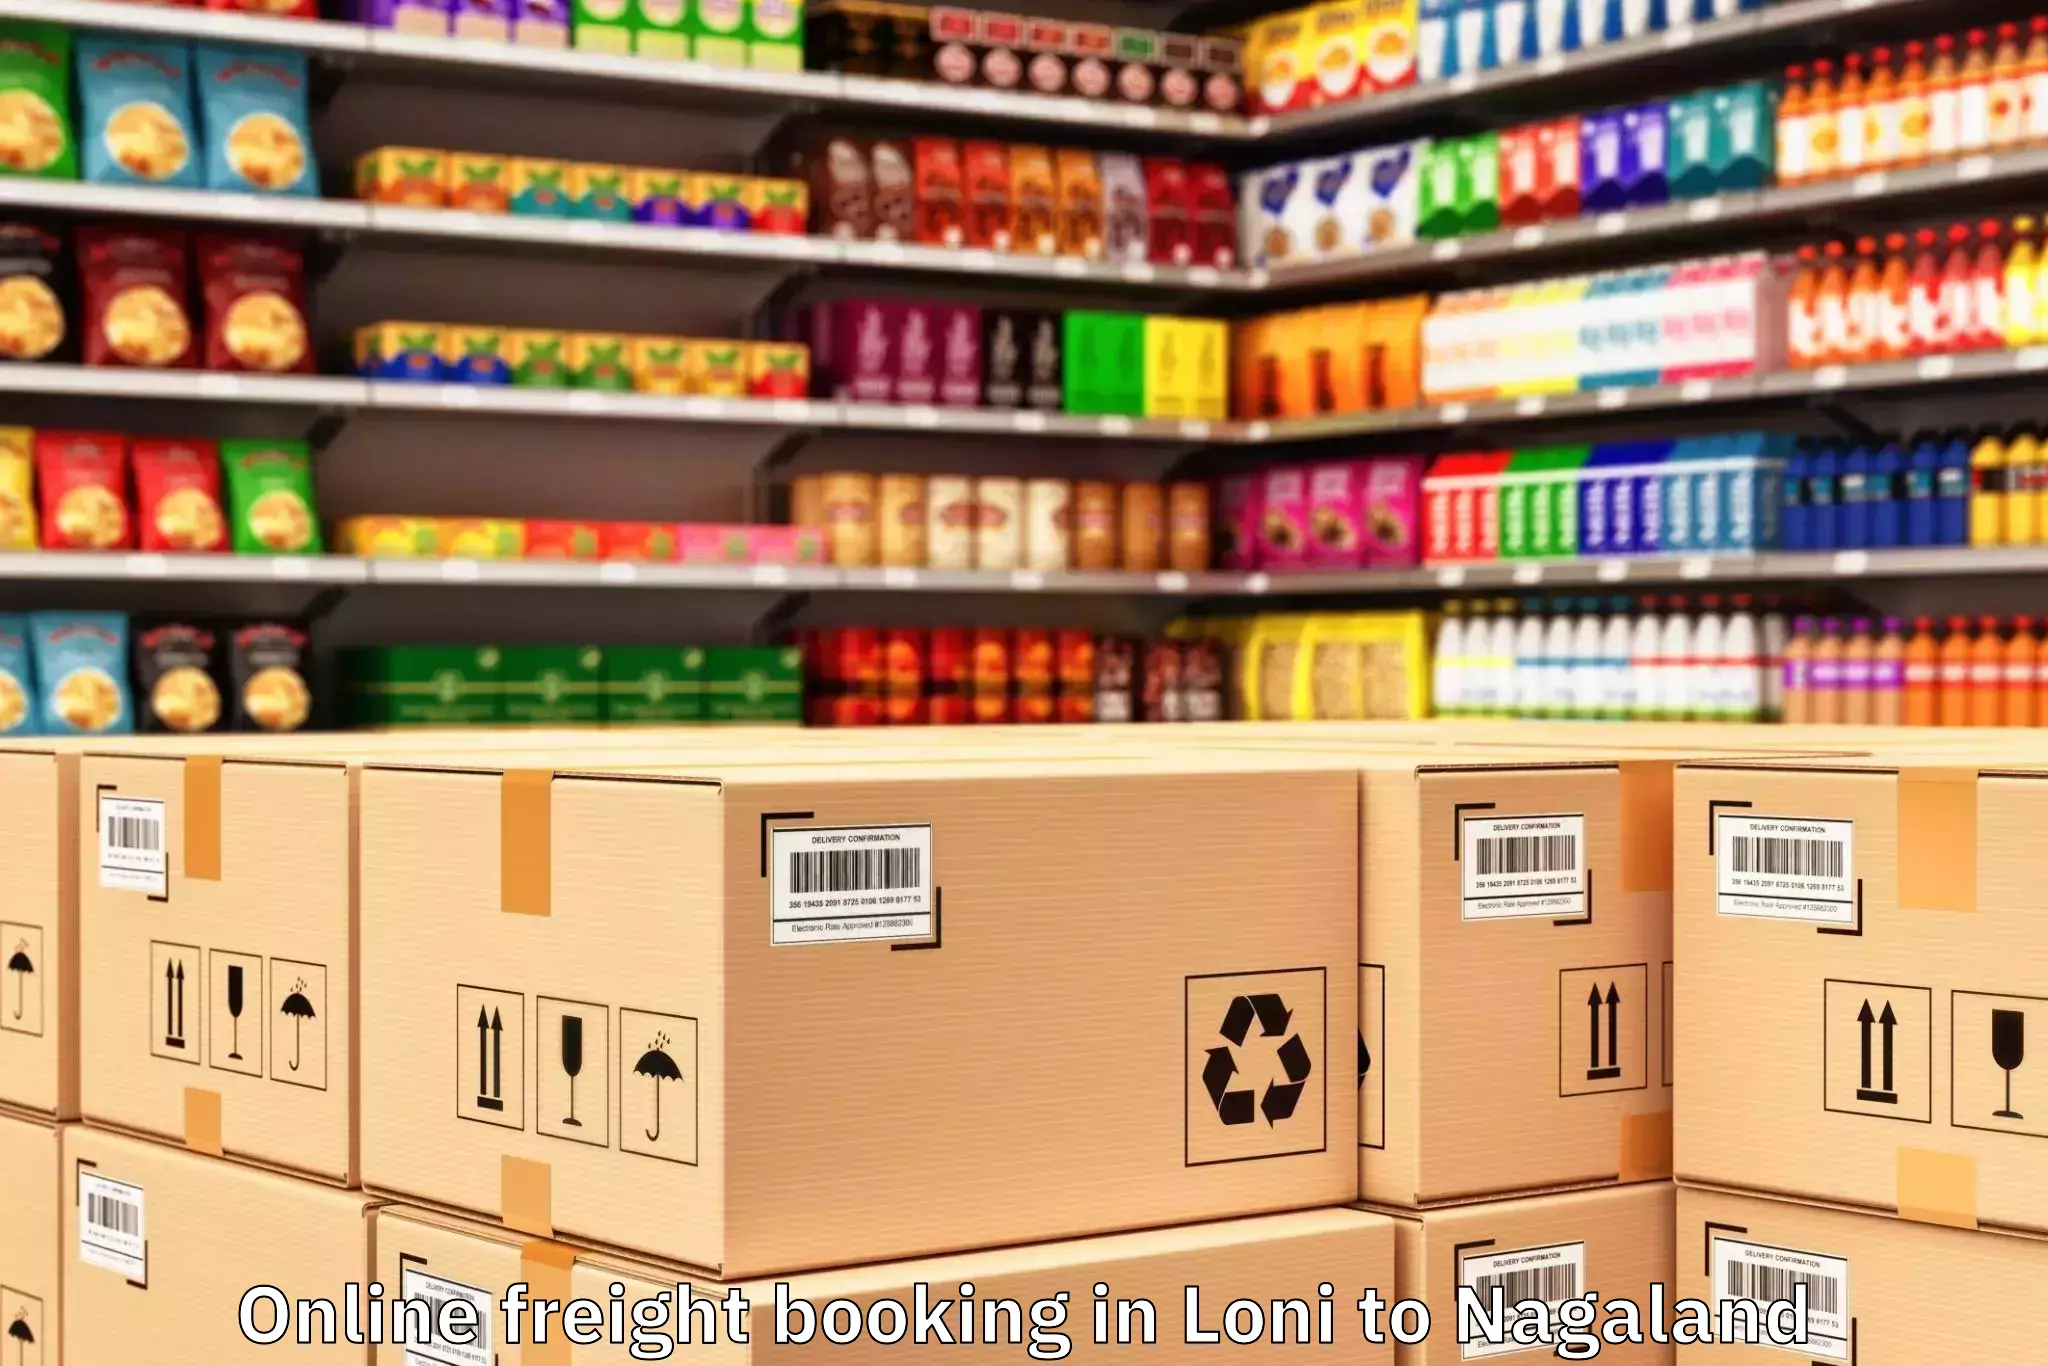 Top Loni to Nsong Online Freight Booking Available